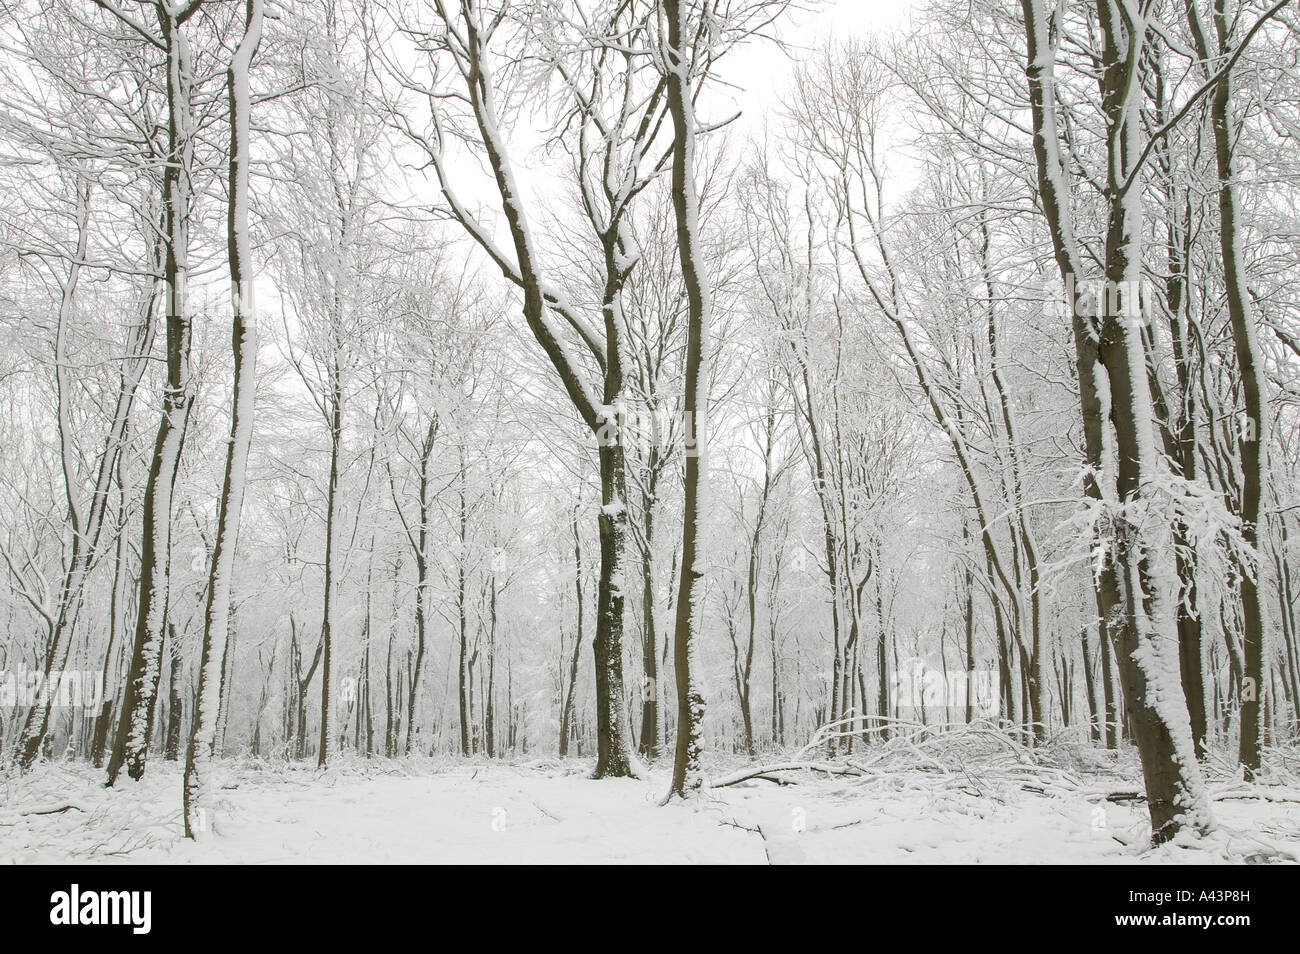 Snow scene showing hundreds beech trees with their trunks covered in fresh white snow Stock Photo